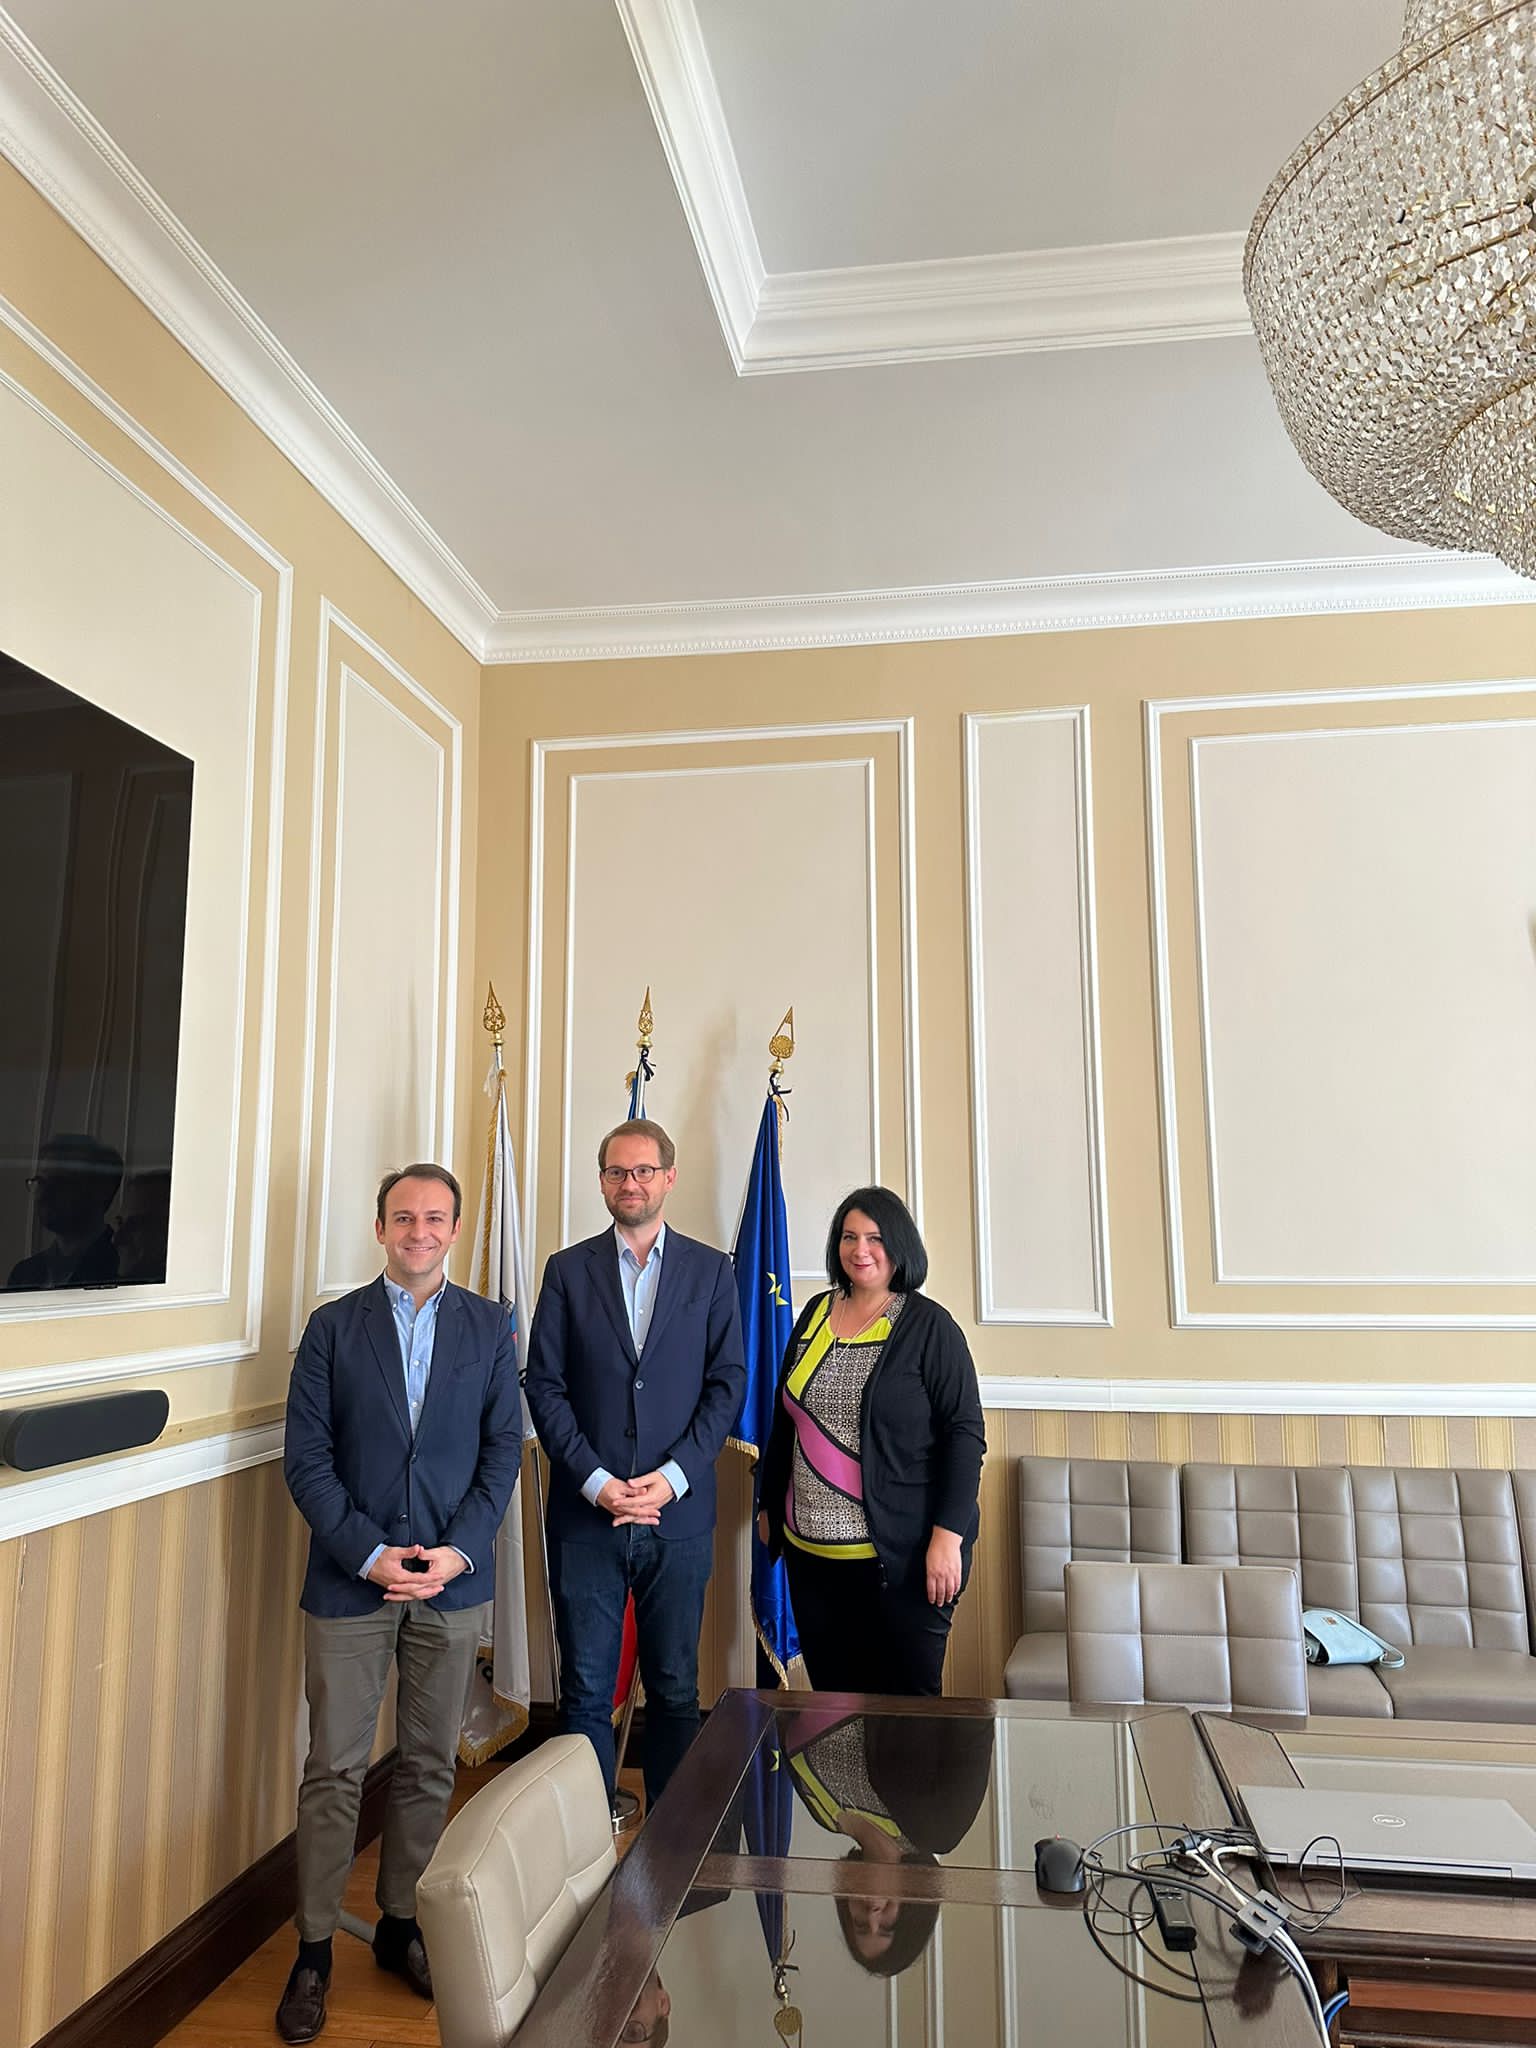 Program Manager Javier Ors Ausín, the Mayor of Timişoara Dominic Fritz, and the President of the Jewish Community of Timișoara, Luciana Friedmann, after a meeting in the City Hall of Timişoara. 